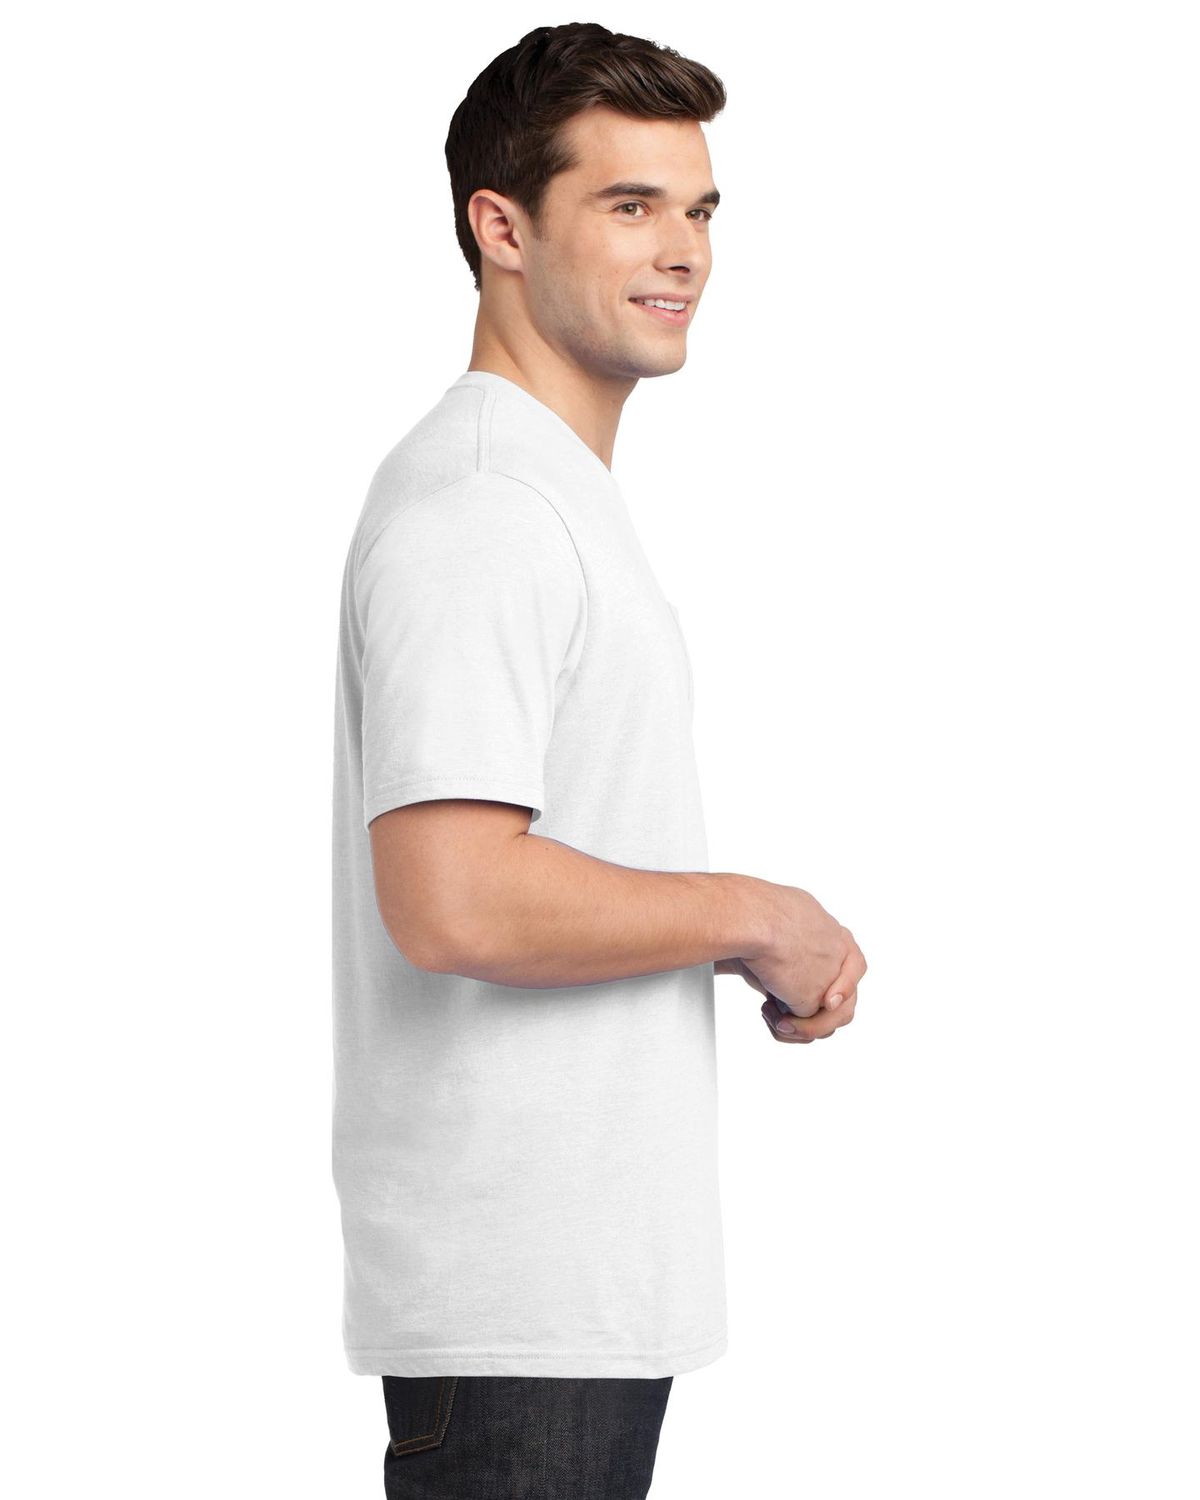 'District DT6000P Young Mens Very Important Tee with Pocket'